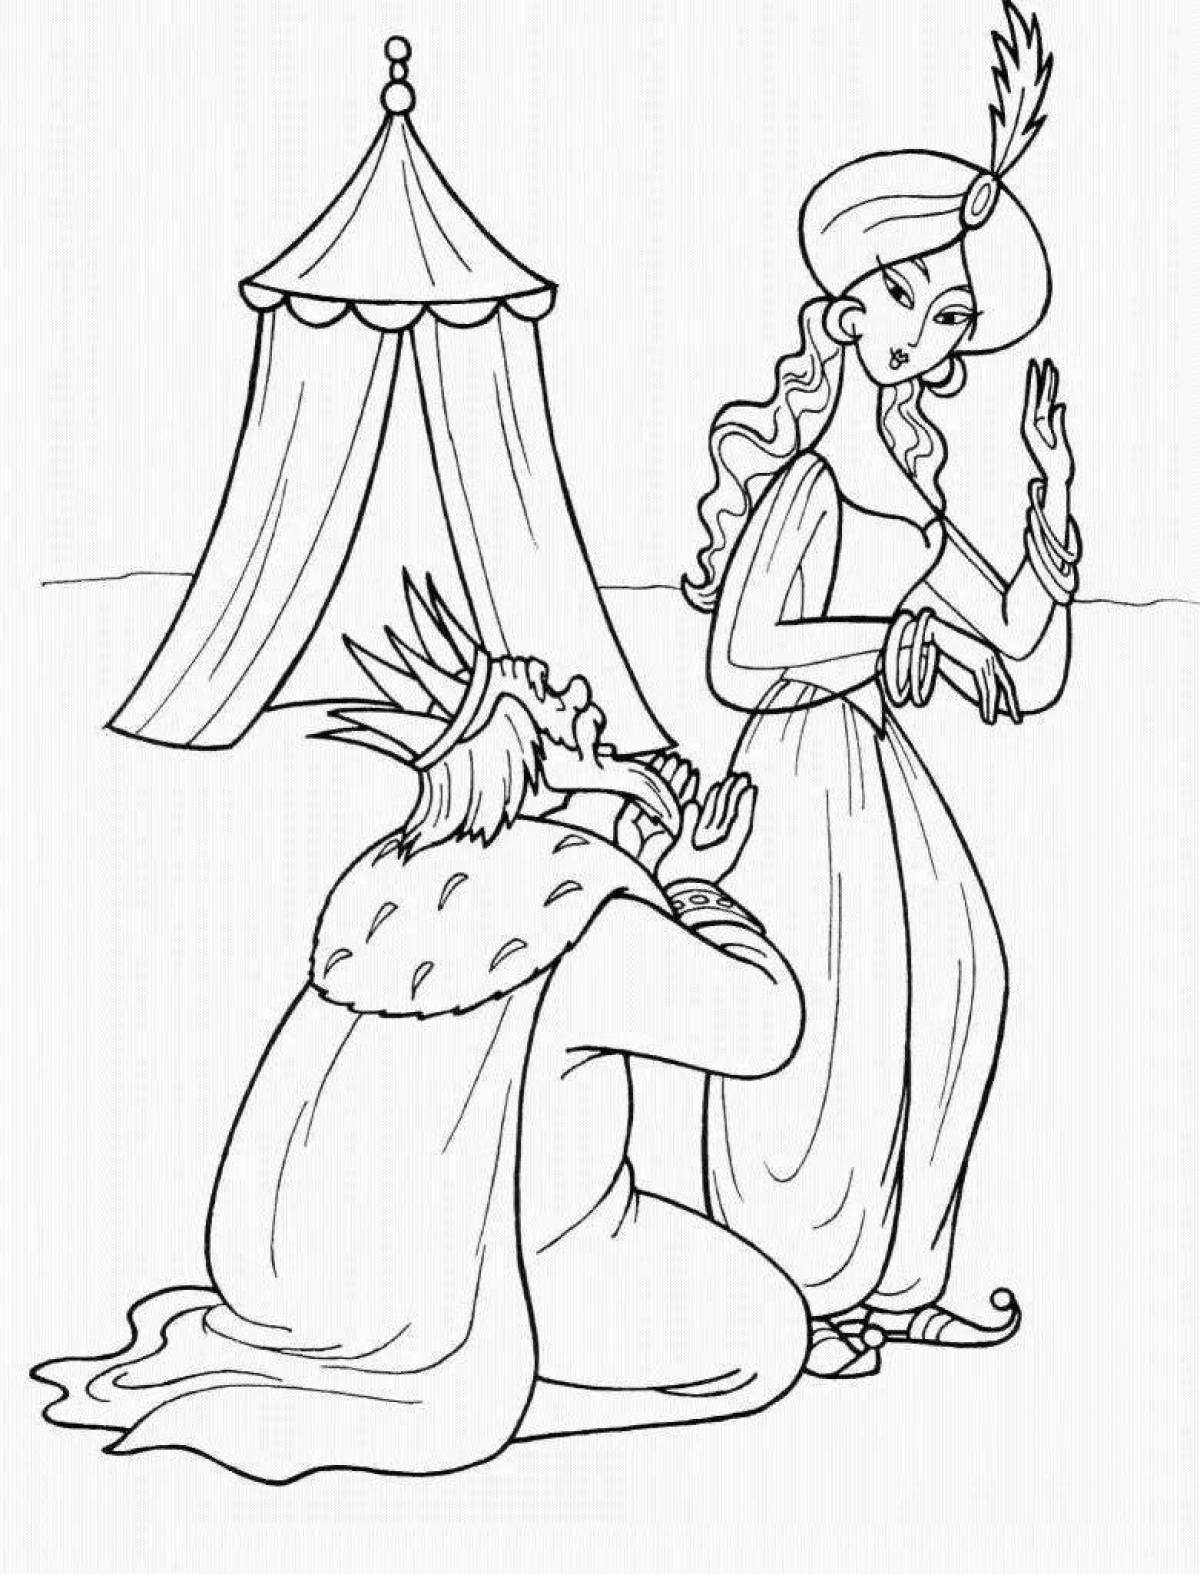 Surreal coloring book based on Pushkin's fairy tales